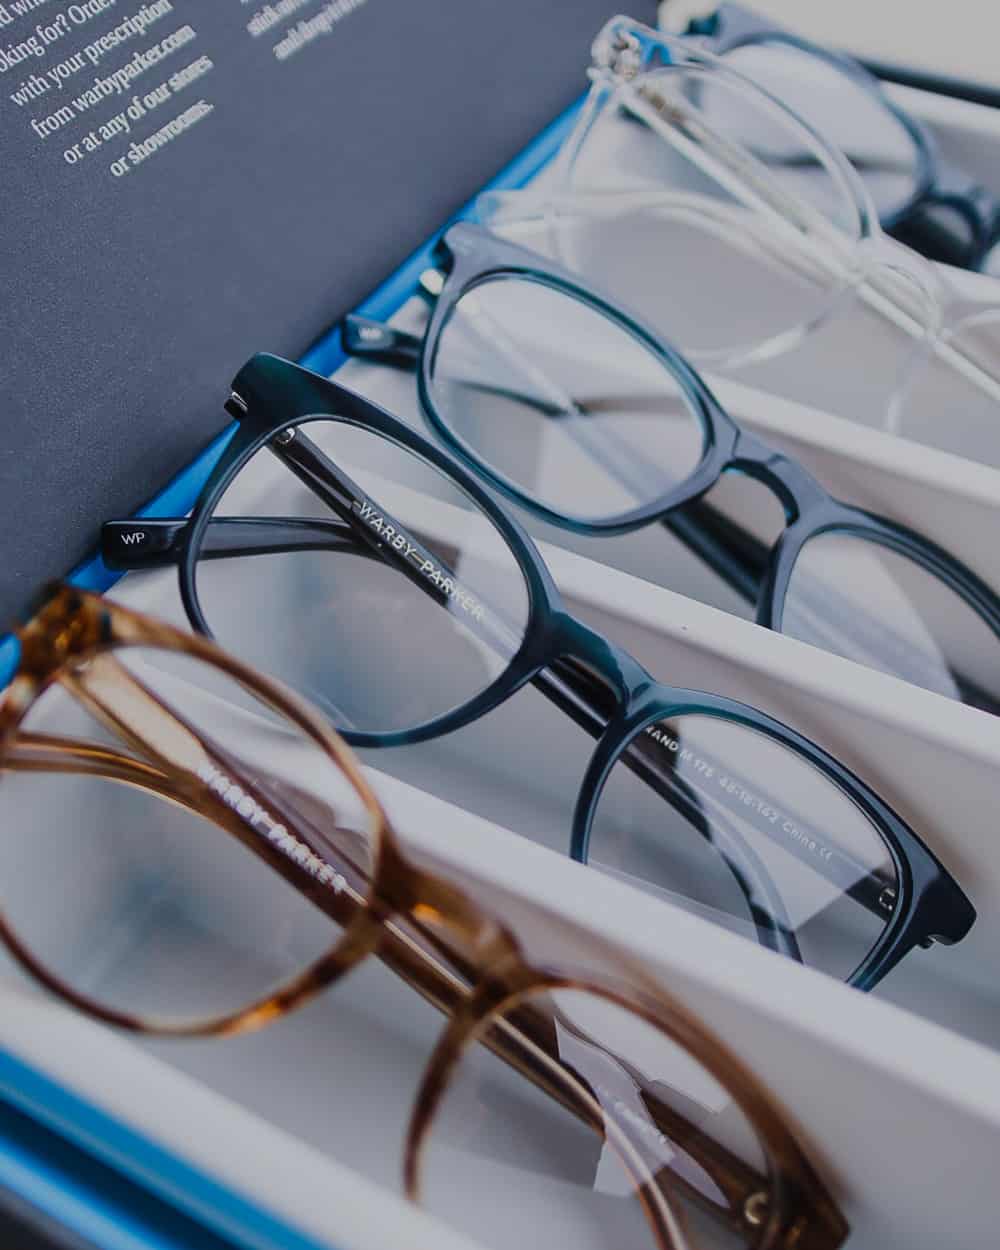 Selection of men's Warby Parker round lens spectacles in tortoiseshell, blue and clear acetate